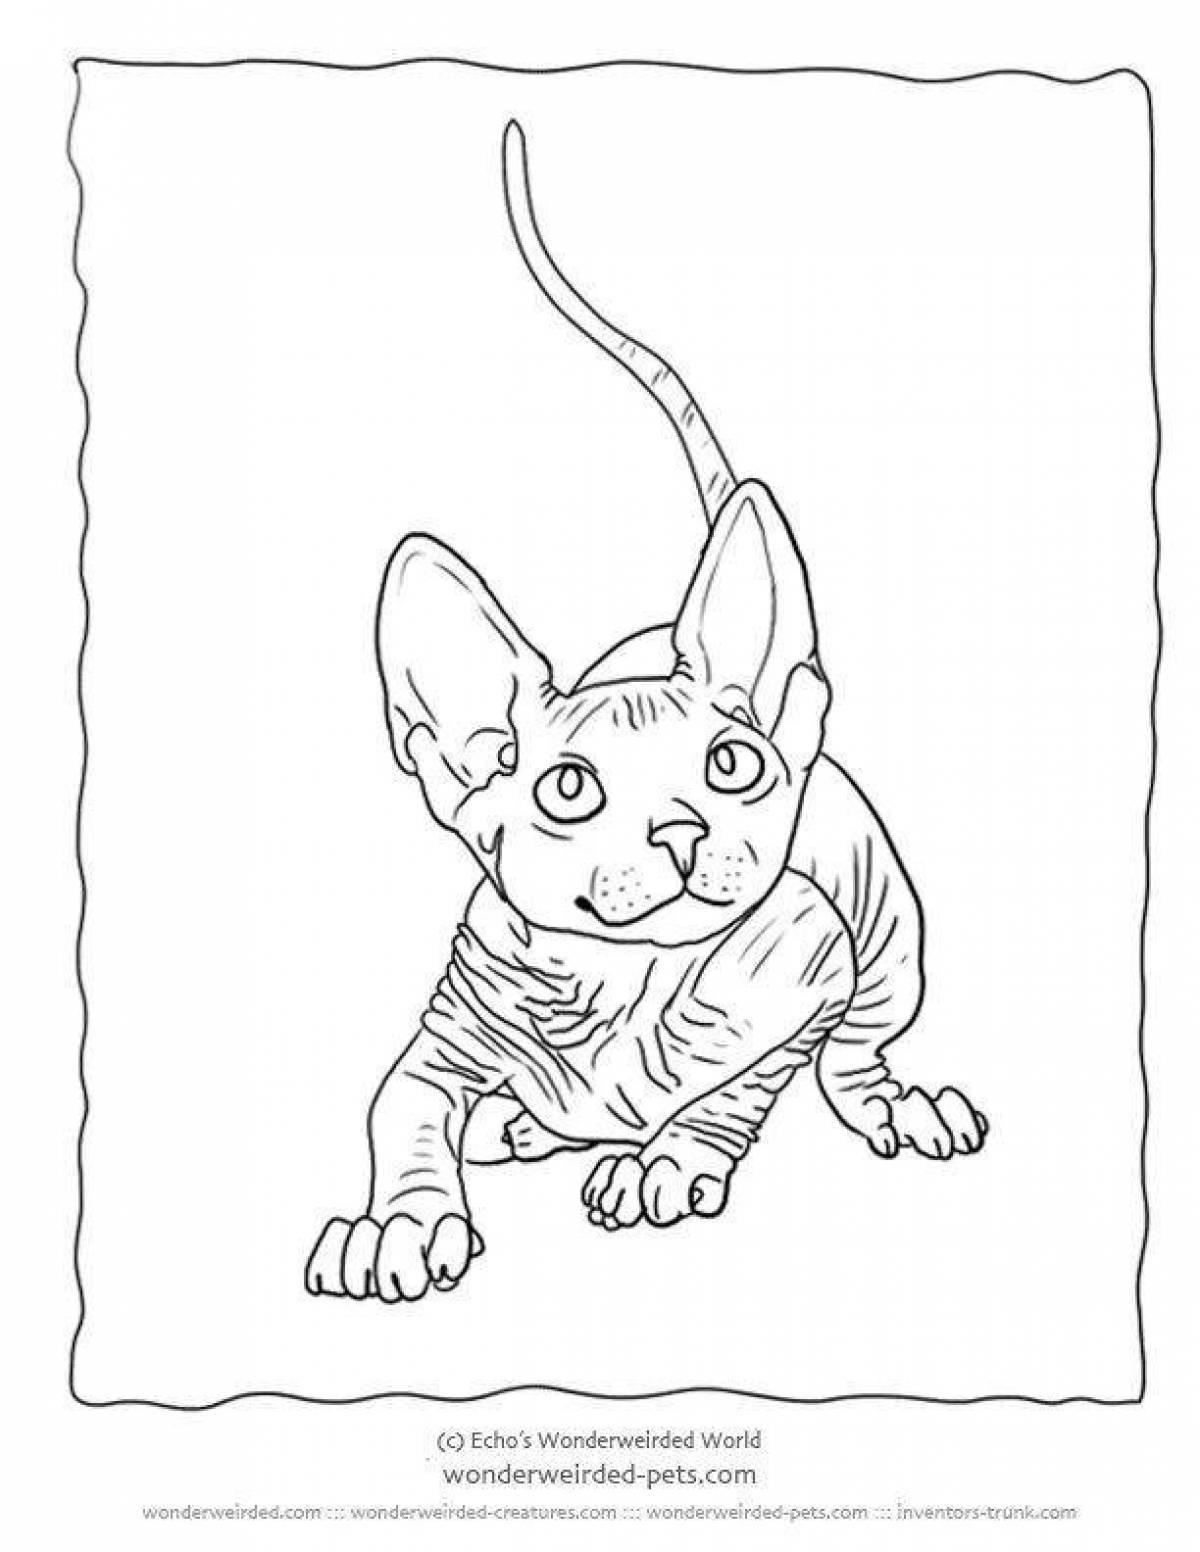 Colorful sphinx cat coloring page